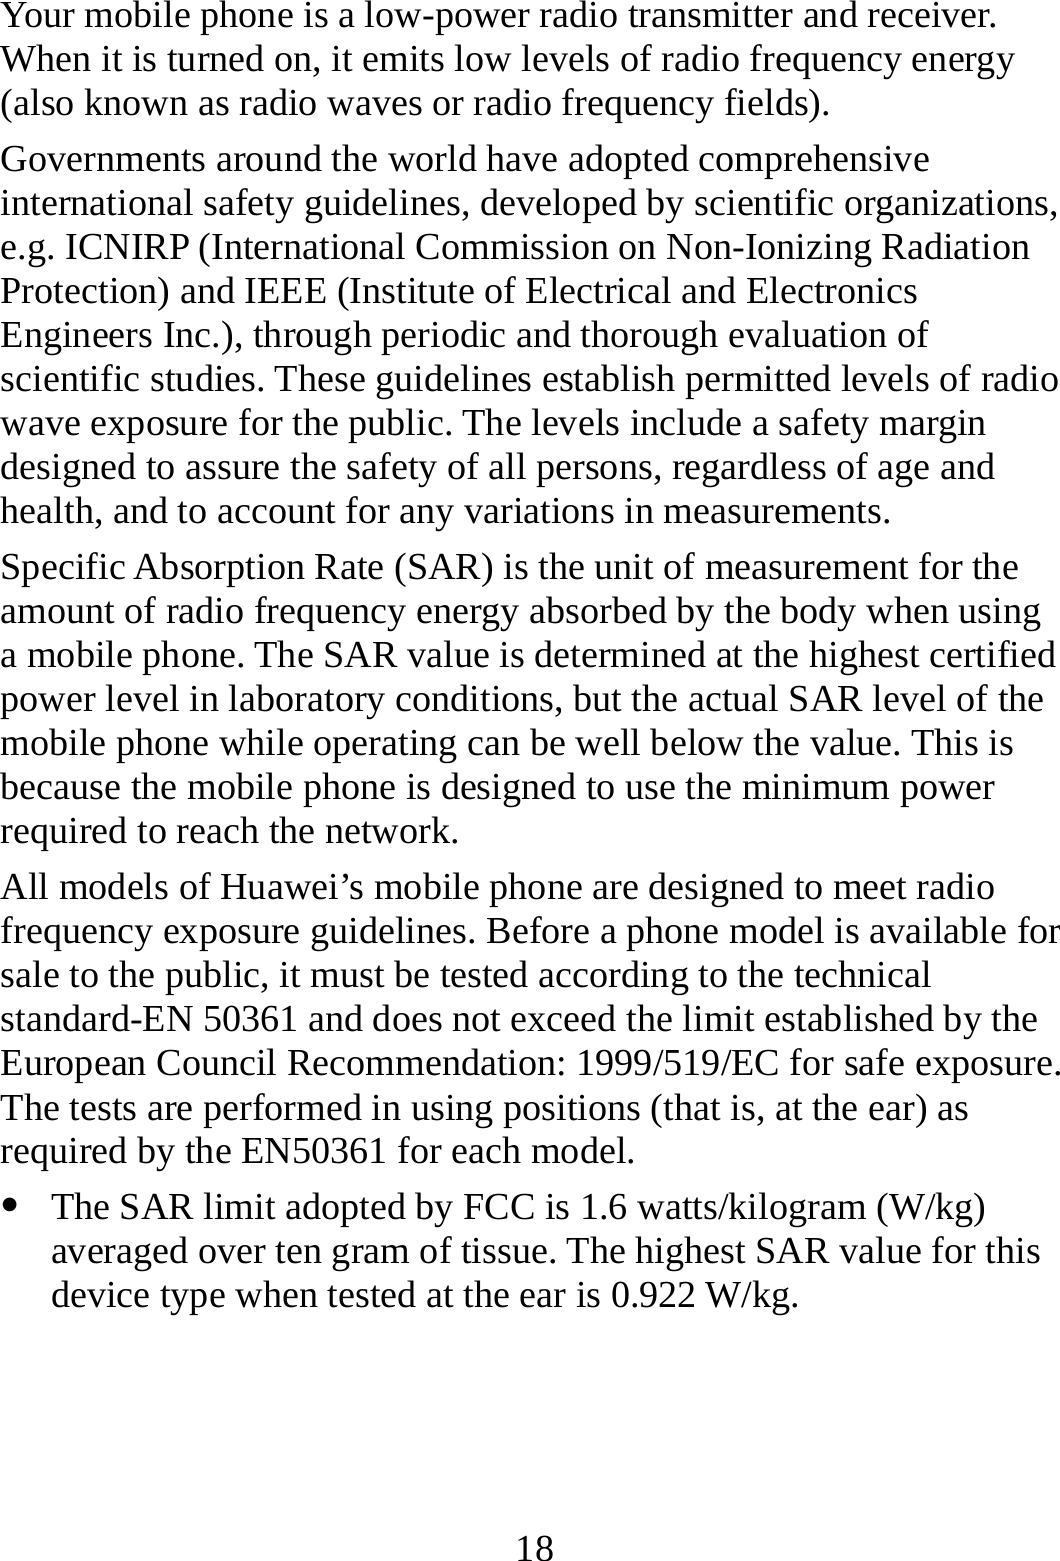  18 Your mobile phone is a low-power radio transmitter and receiver. When it is turned on, it emits low levels of radio frequency energy (also known as radio waves or radio frequency fields). Governments around the world have adopted comprehensive international safety guidelines, developed by scientific organizations, e.g. ICNIRP (International Commission on Non-Ionizing Radiation Protection) and IEEE (Institute of Electrical and Electronics Engineers Inc.), through periodic and thorough evaluation of scientific studies. These guidelines establish permitted levels of radio wave exposure for the public. The levels include a safety margin designed to assure the safety of all persons, regardless of age and health, and to account for any variations in measurements. Specific Absorption Rate (SAR) is the unit of measurement for the amount of radio frequency energy absorbed by the body when using a mobile phone. The SAR value is determined at the highest certified power level in laboratory conditions, but the actual SAR level of the mobile phone while operating can be well below the value. This is because the mobile phone is designed to use the minimum power required to reach the network. All models of Huawei’s mobile phone are designed to meet radio frequency exposure guidelines. Before a phone model is available for sale to the public, it must be tested according to the technical standard-EN 50361 and does not exceed the limit established by the European Council Recommendation: 1999/519/EC for safe exposure. The tests are performed in using positions (that is, at the ear) as required by the EN50361 for each model.   The SAR limit adopted by FCC is 1.6 watts/kilogram (W/kg) averaged over ten gram of tissue. The highest SAR value for this device type when tested at the ear is 0.922 W/kg.    